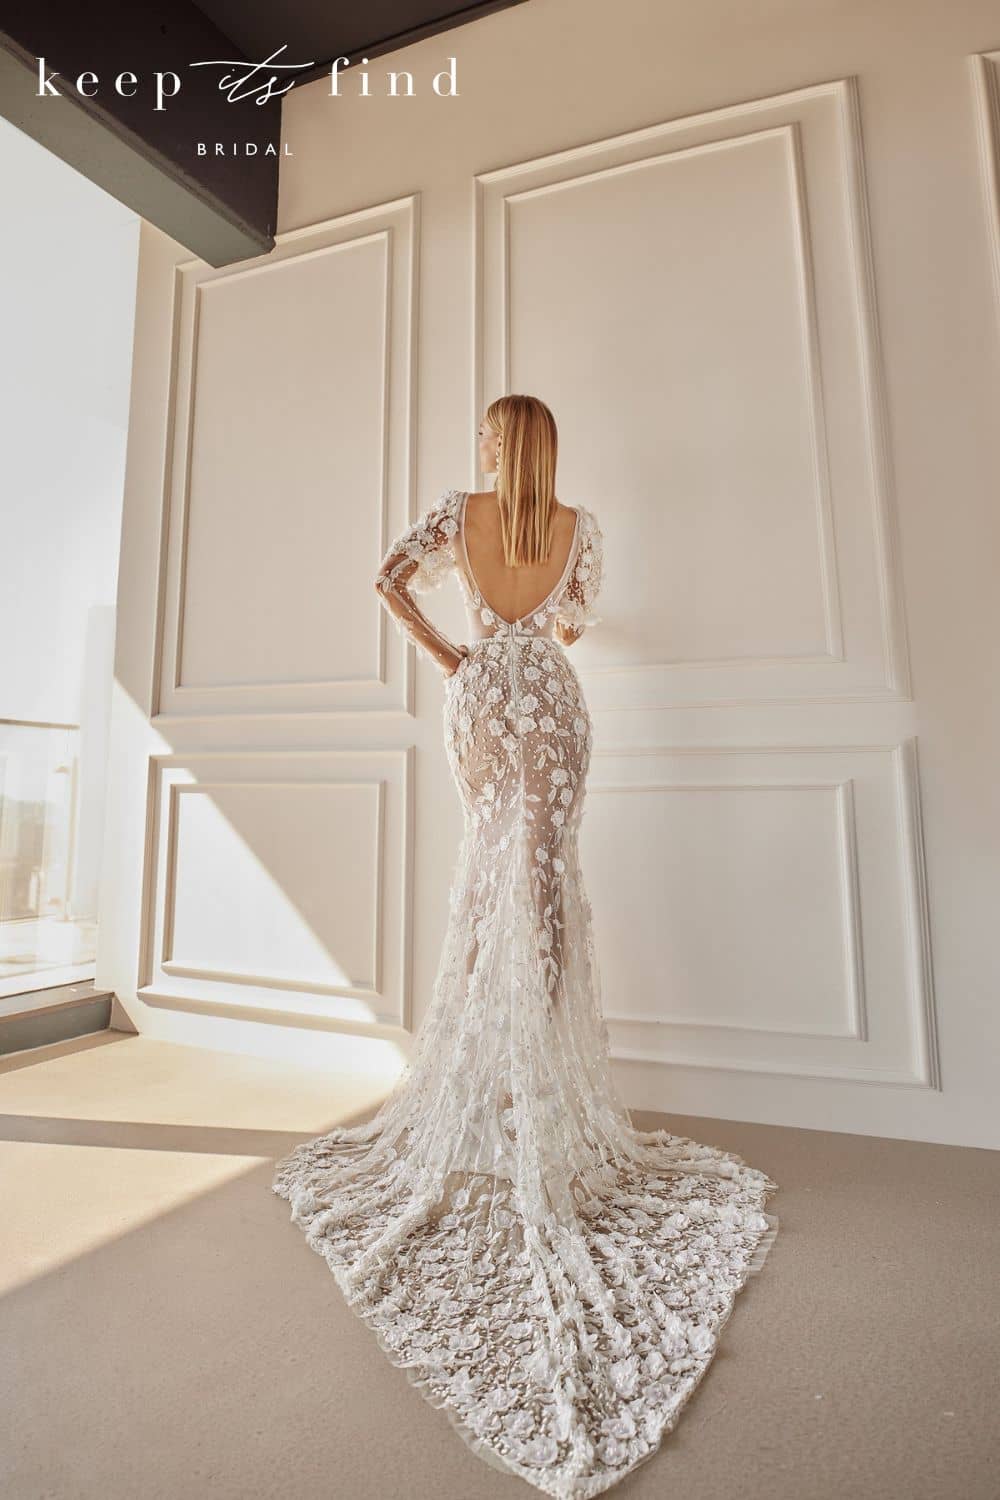 Bride standing in room with back toward camera in lace wedding dress with open back, long train and long sleeves